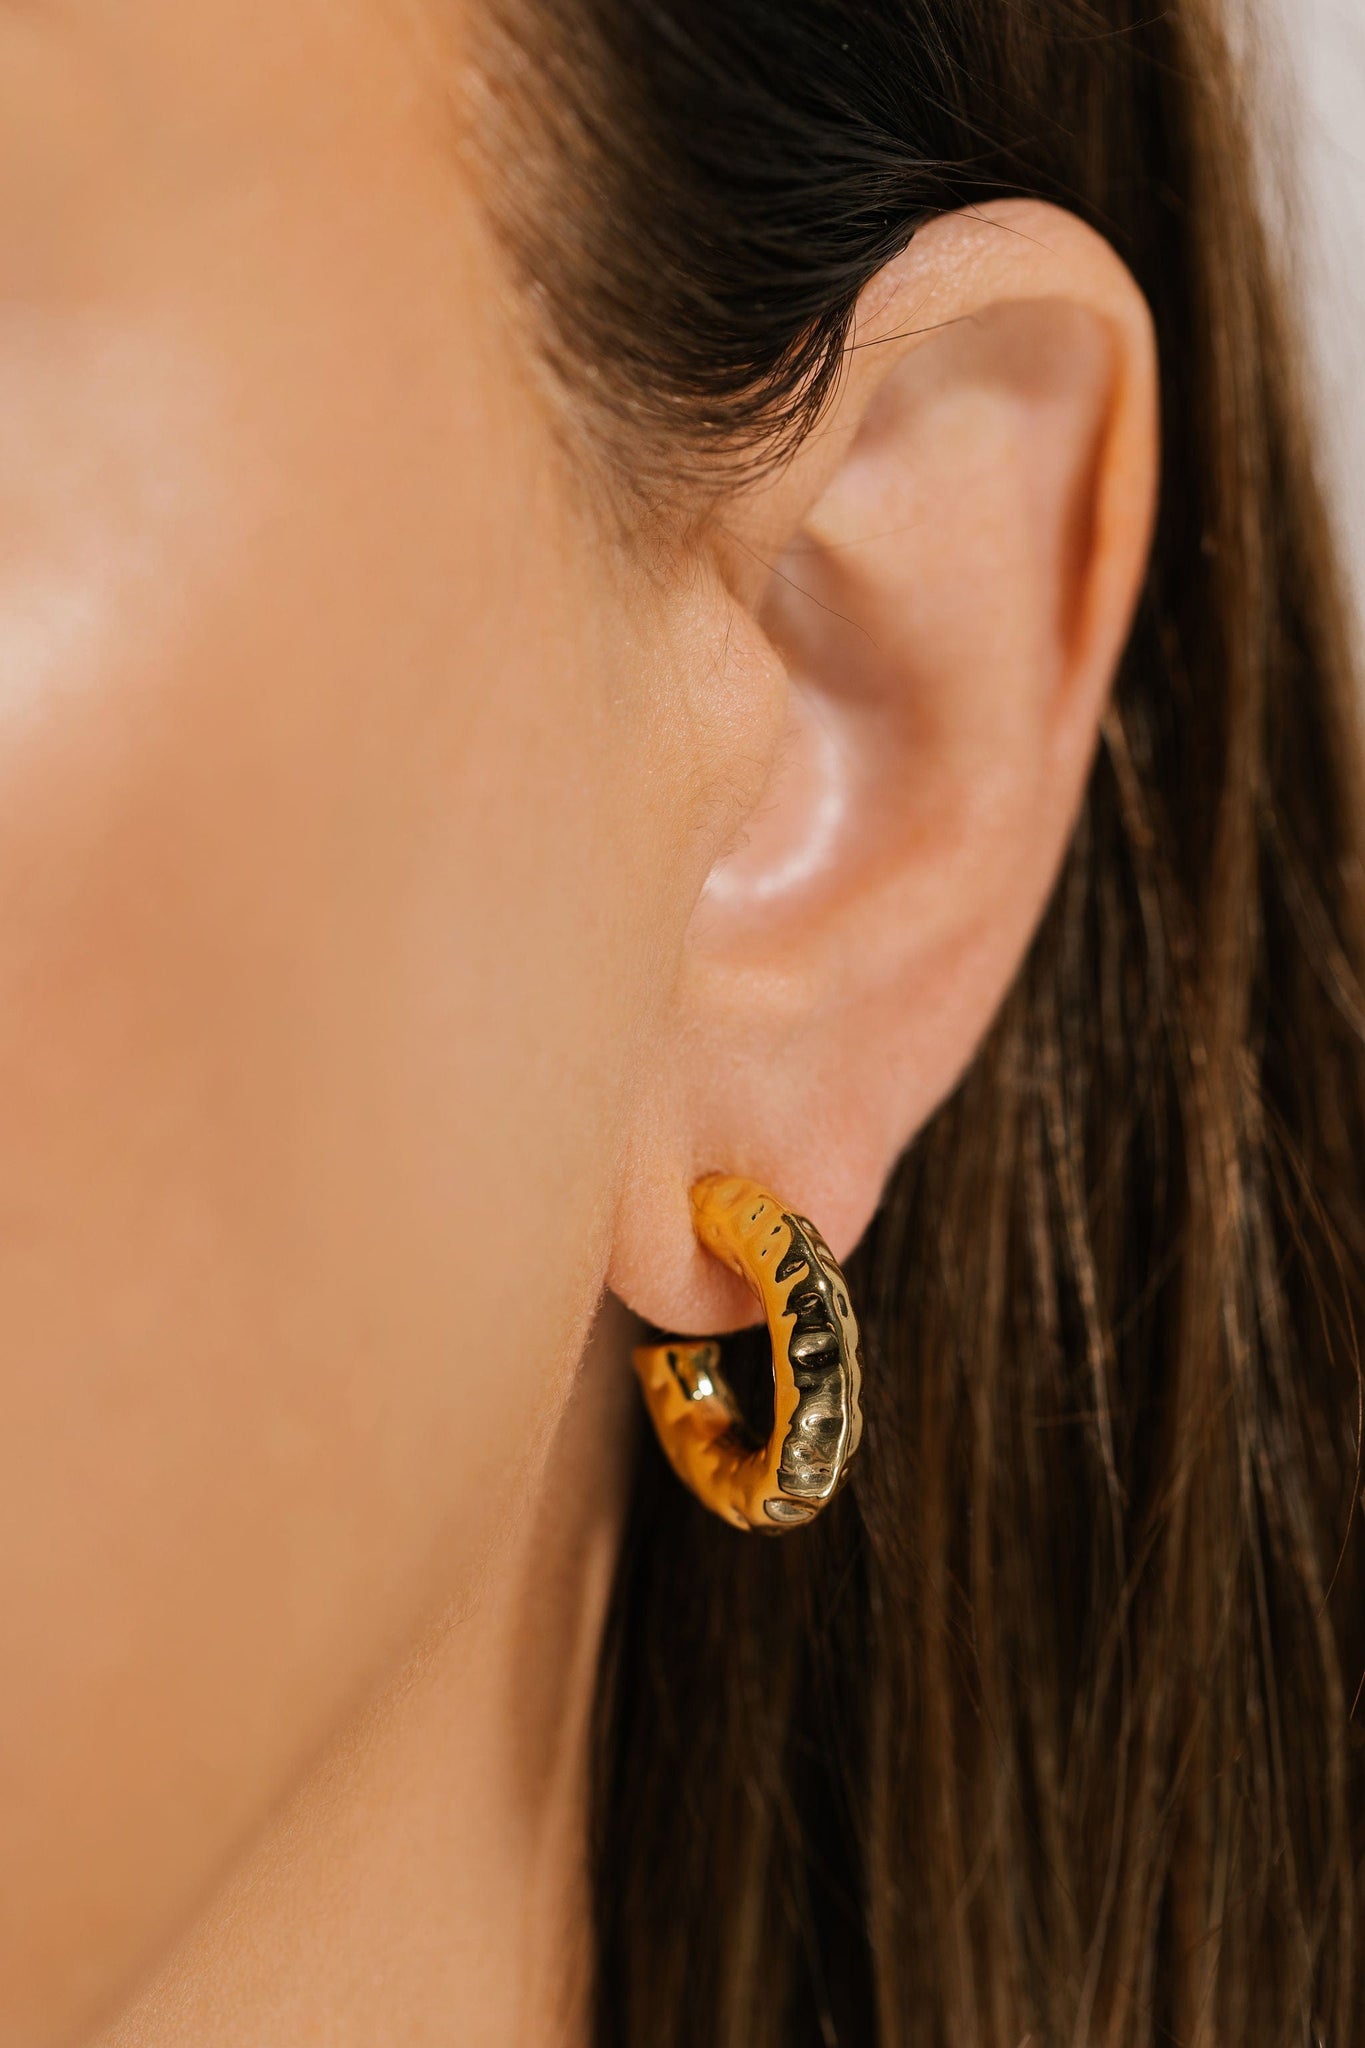 A close-up view shows the golden textured 20mm Marbella Hoop on the model's ear. 